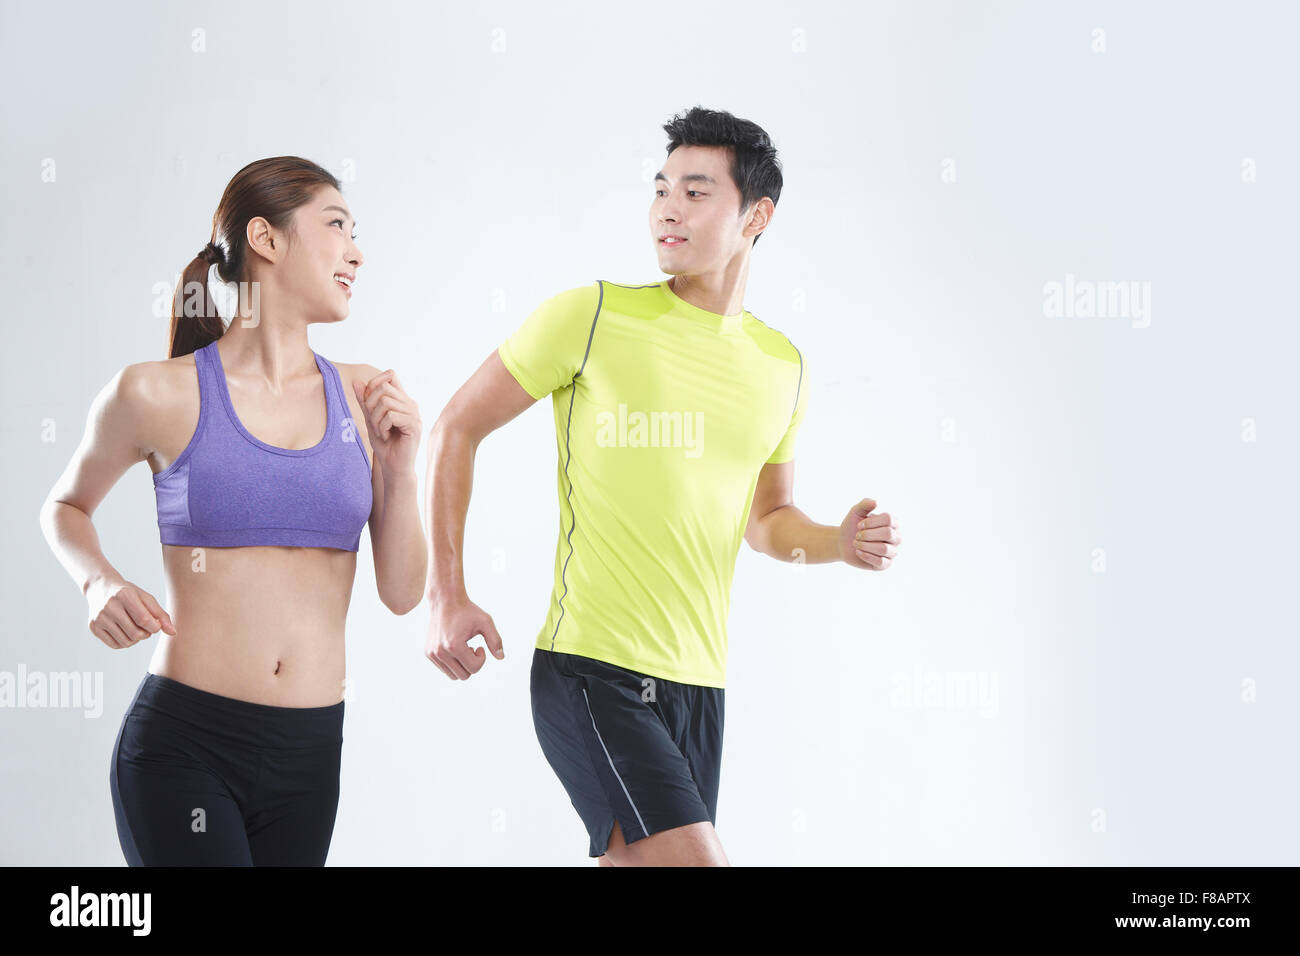 Smiling couple running together face to face Stock Photo